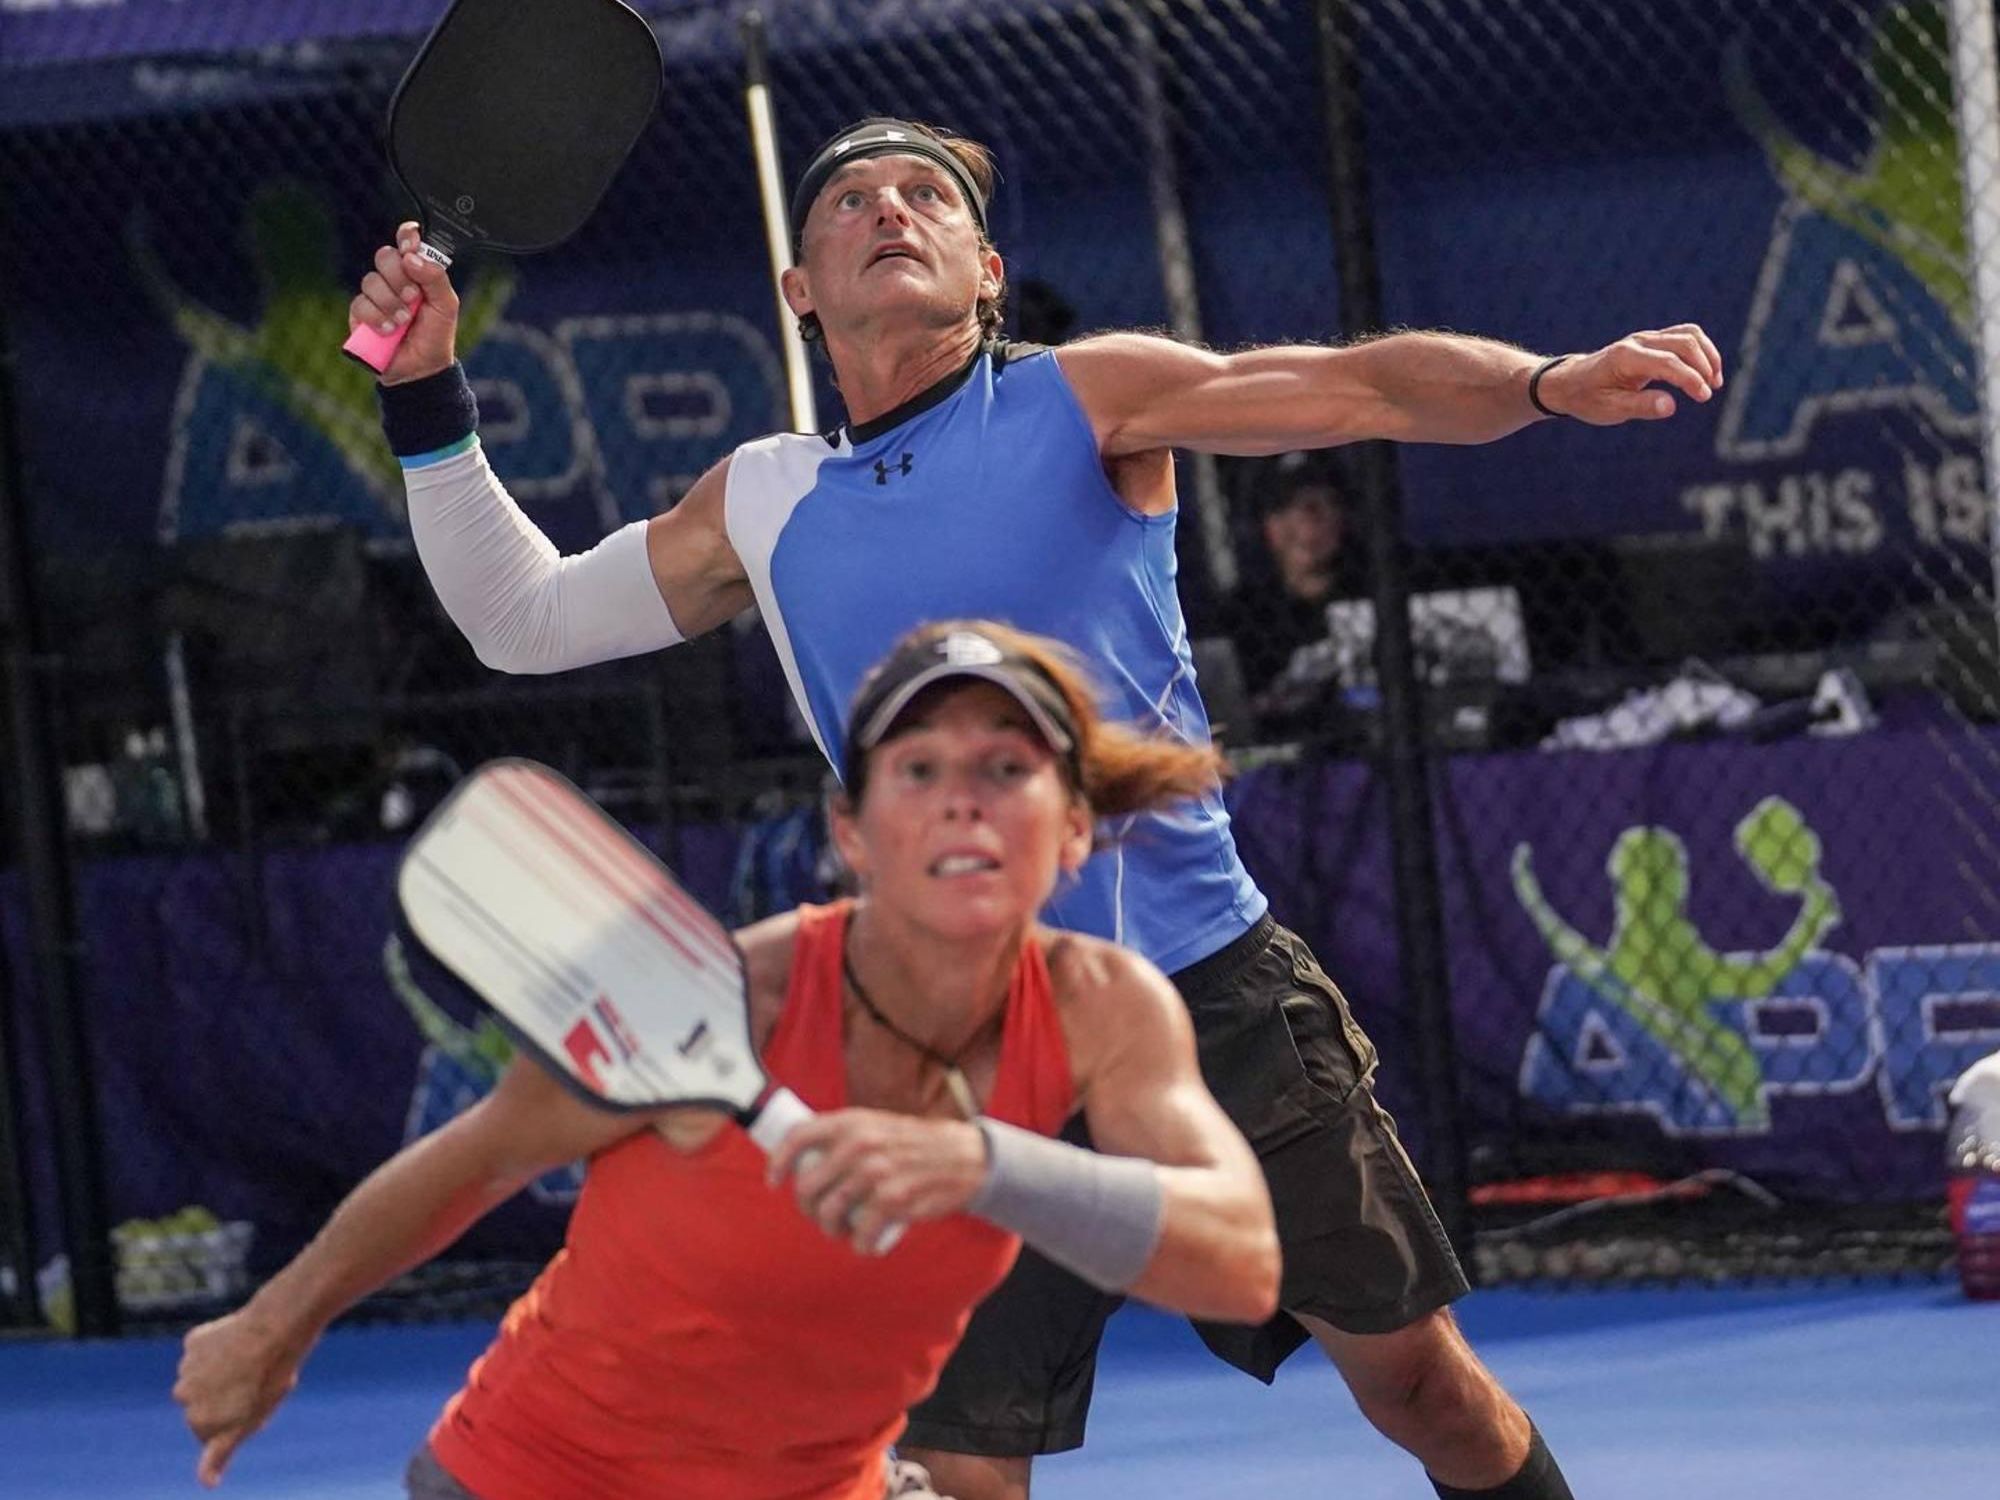 Largest pickleball tournament is coming to Rockwall with coverage on TV